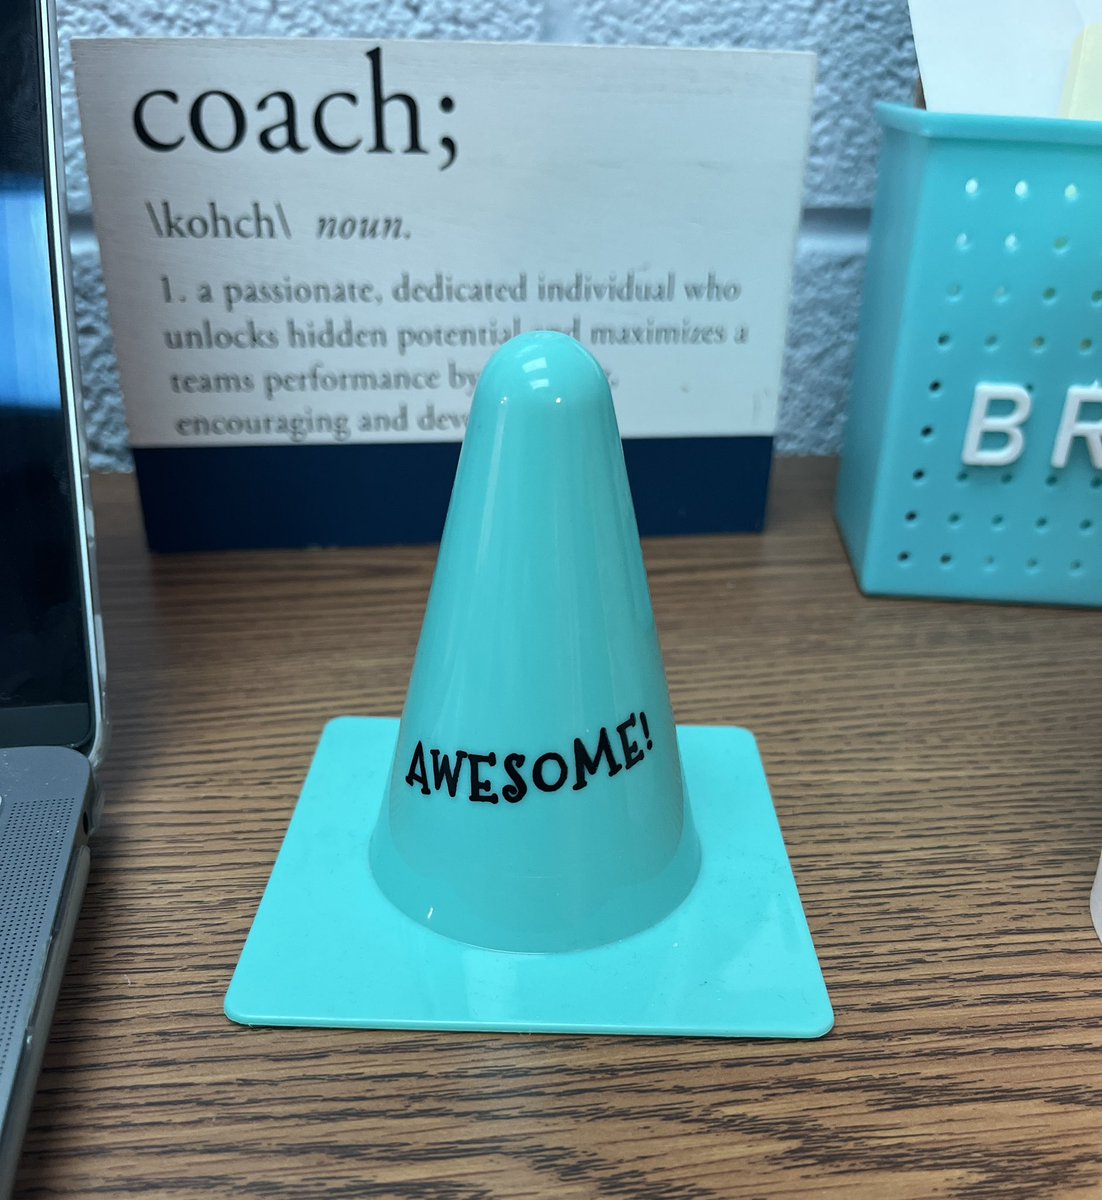 Lester teachers pass these cones around throughout the week! I was lucky enough to have one put on my desk! It made me smile and made my heart happy! It’s even my favorite color! Thank you to whoever dropped it off! #lechooseshappy #dg58pride